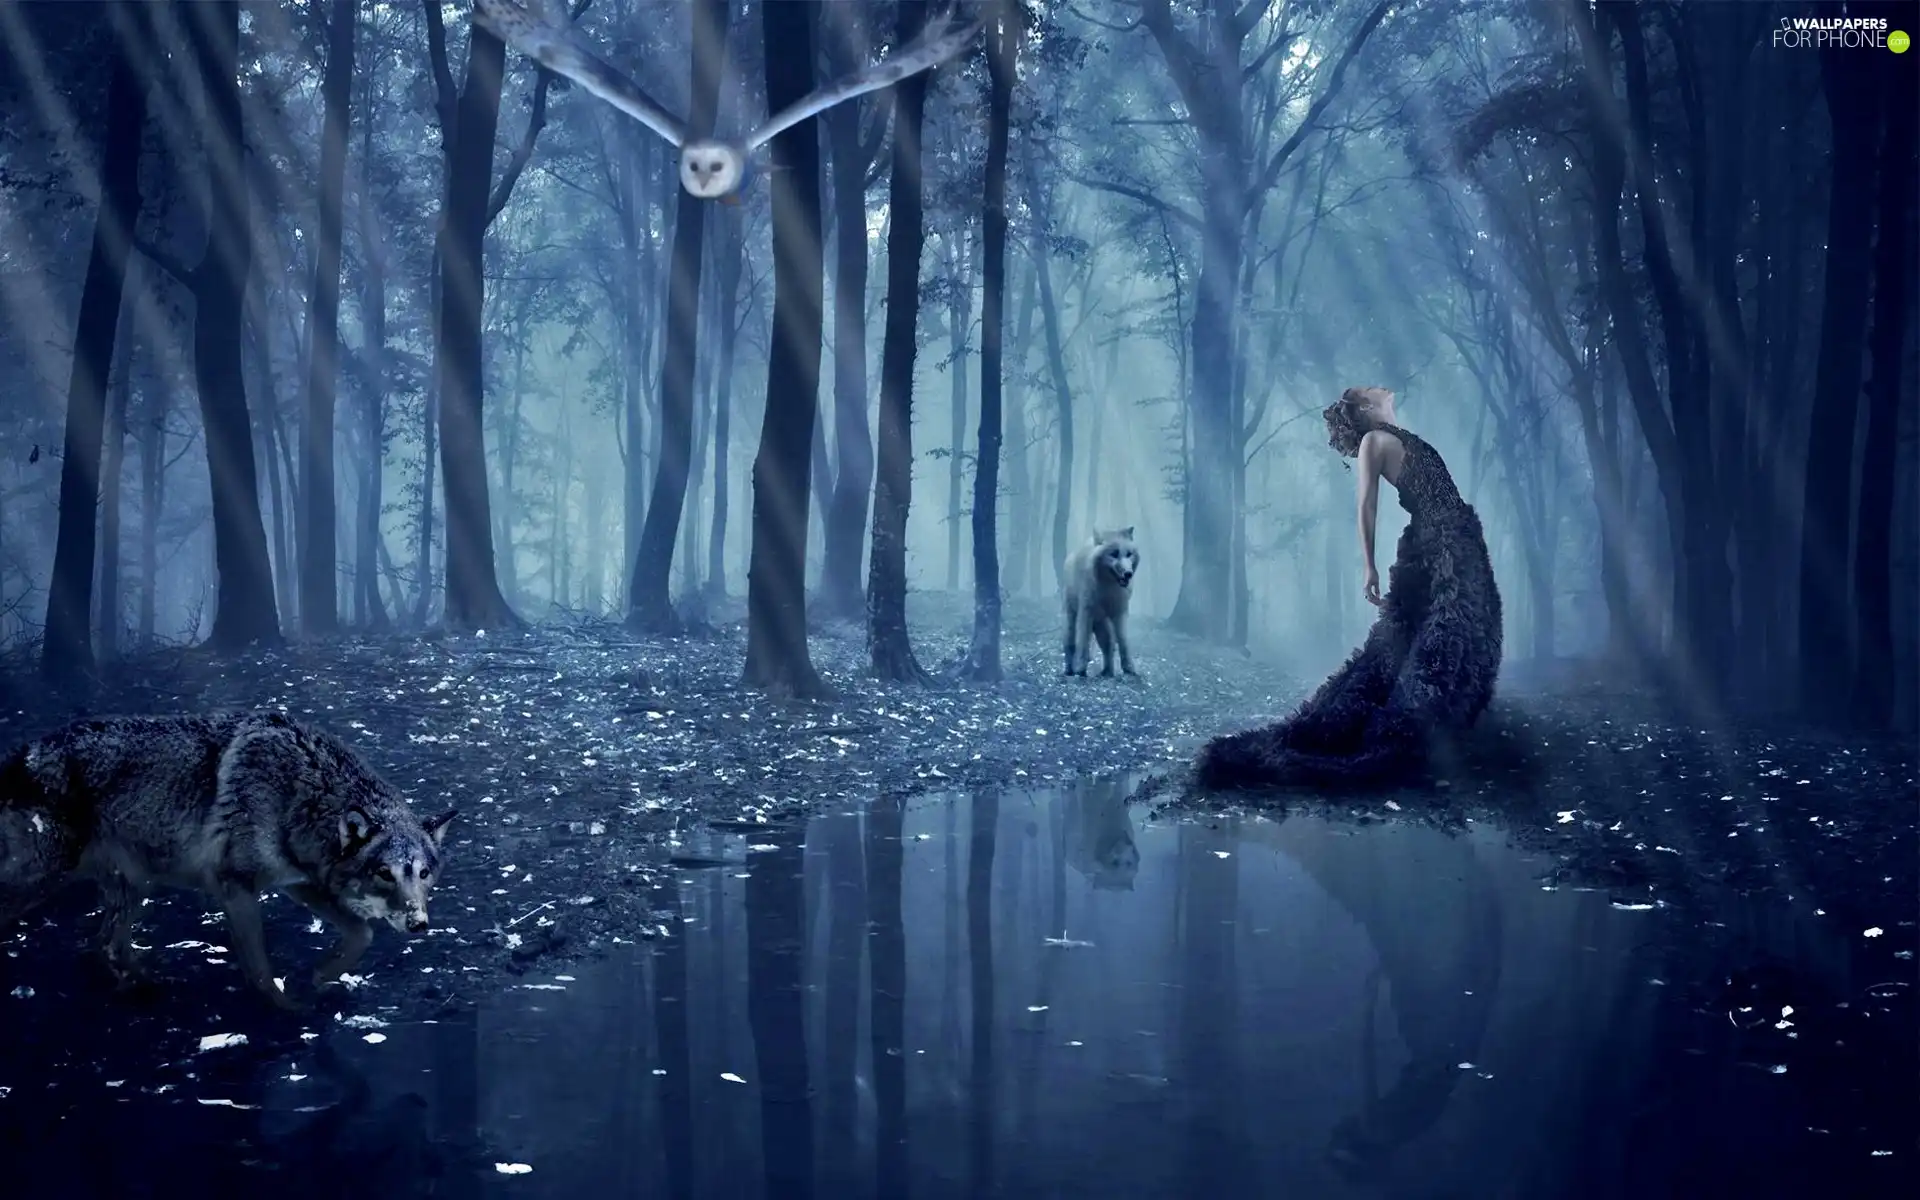 owl-water-viewes-reflection-women-wolves-trees.jpg